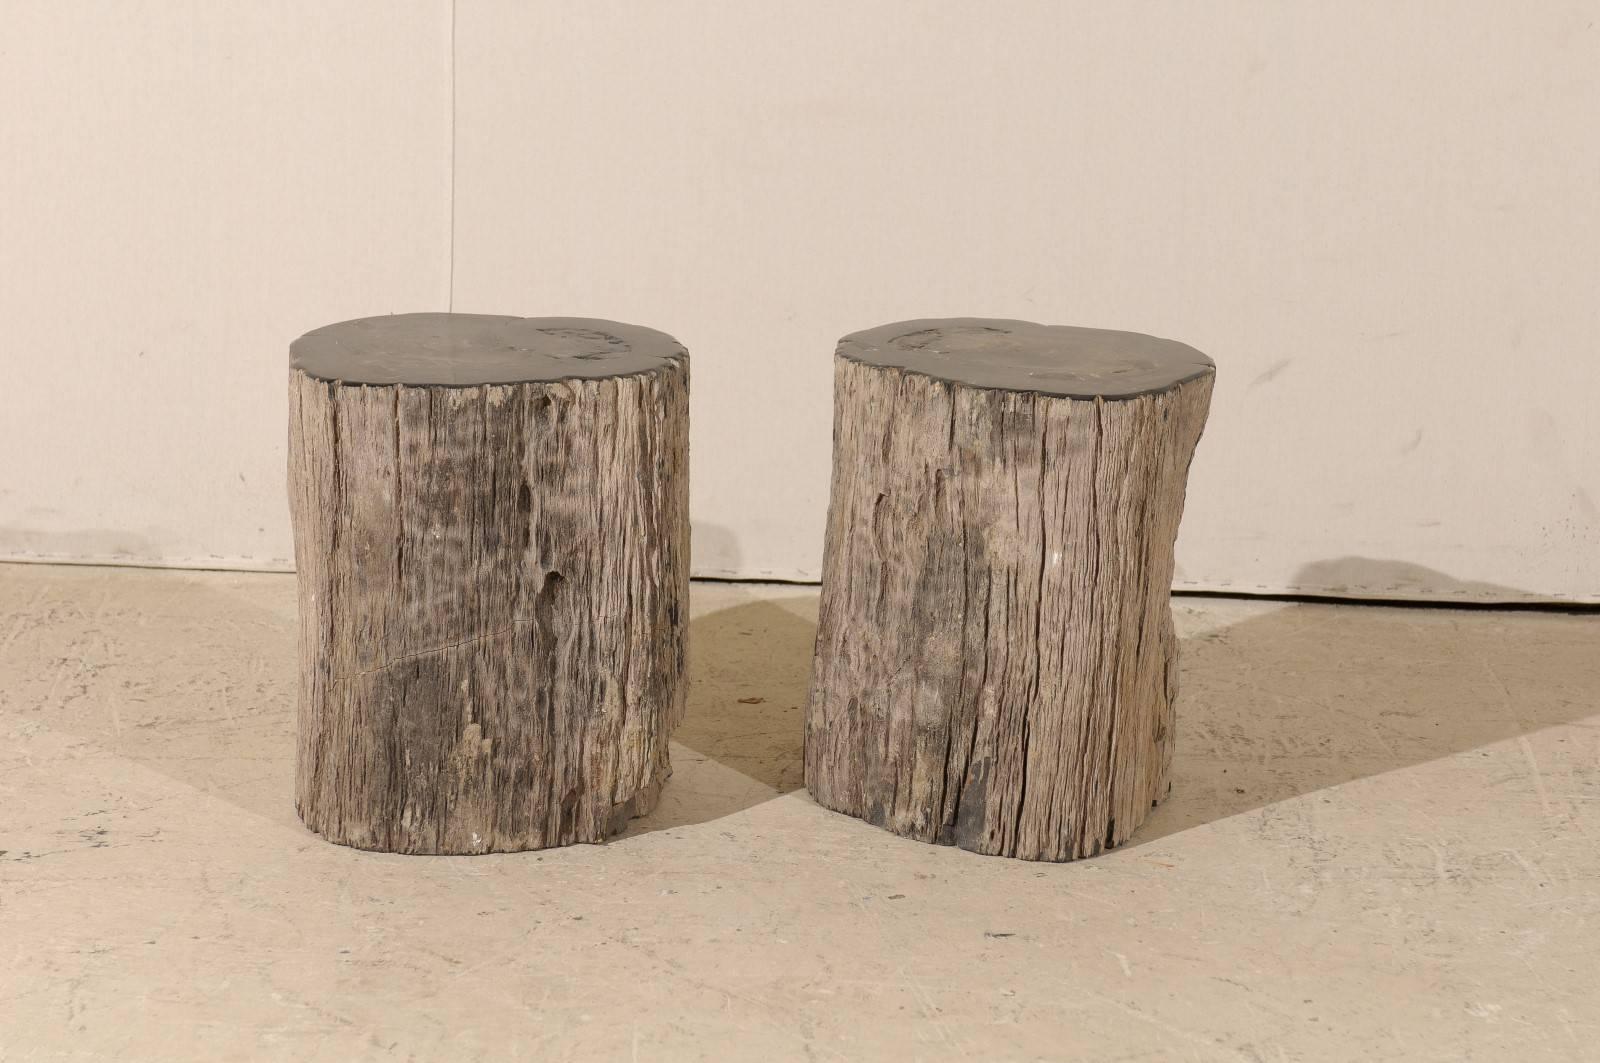 A pair of black color petrified wood drinks tables. This pair of petrified wood drinks table’s features a polished black top with rougher brown color sides. Petrified wood is a fossil. Over time, the petrified wood becomes so sturdy and dense that